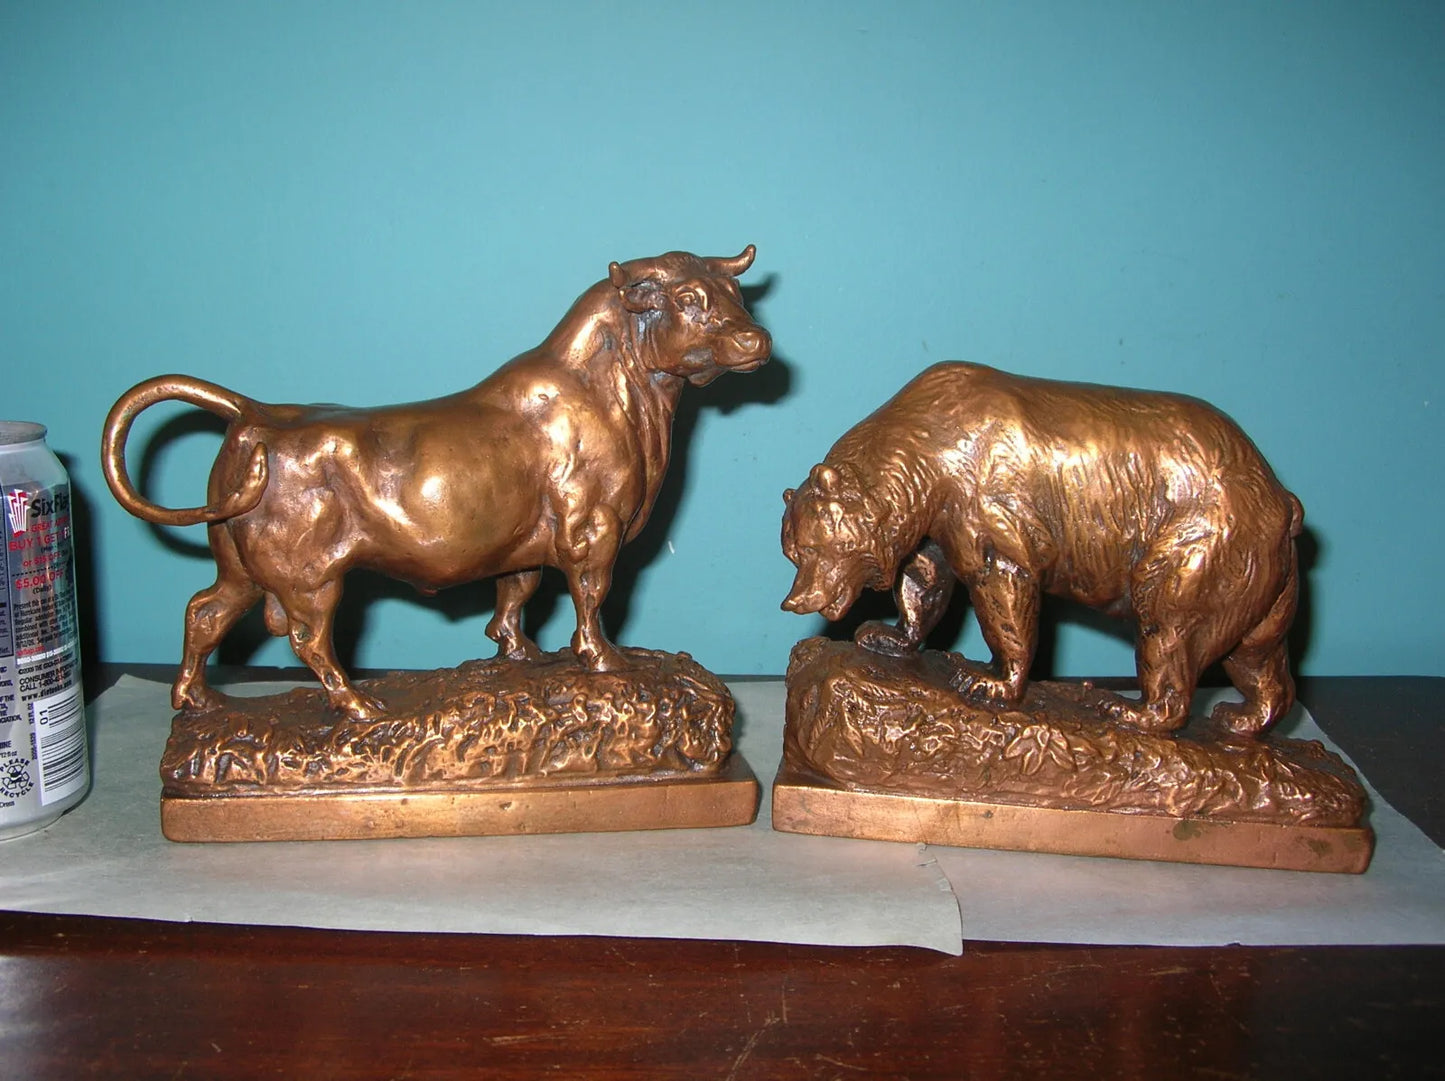 Antique Pompeian Bronze-clad bookends by Paul Herzel, featuring a bull and a bear, symbolizing Wall Street, showcasing intricate detail and craftsmanship.